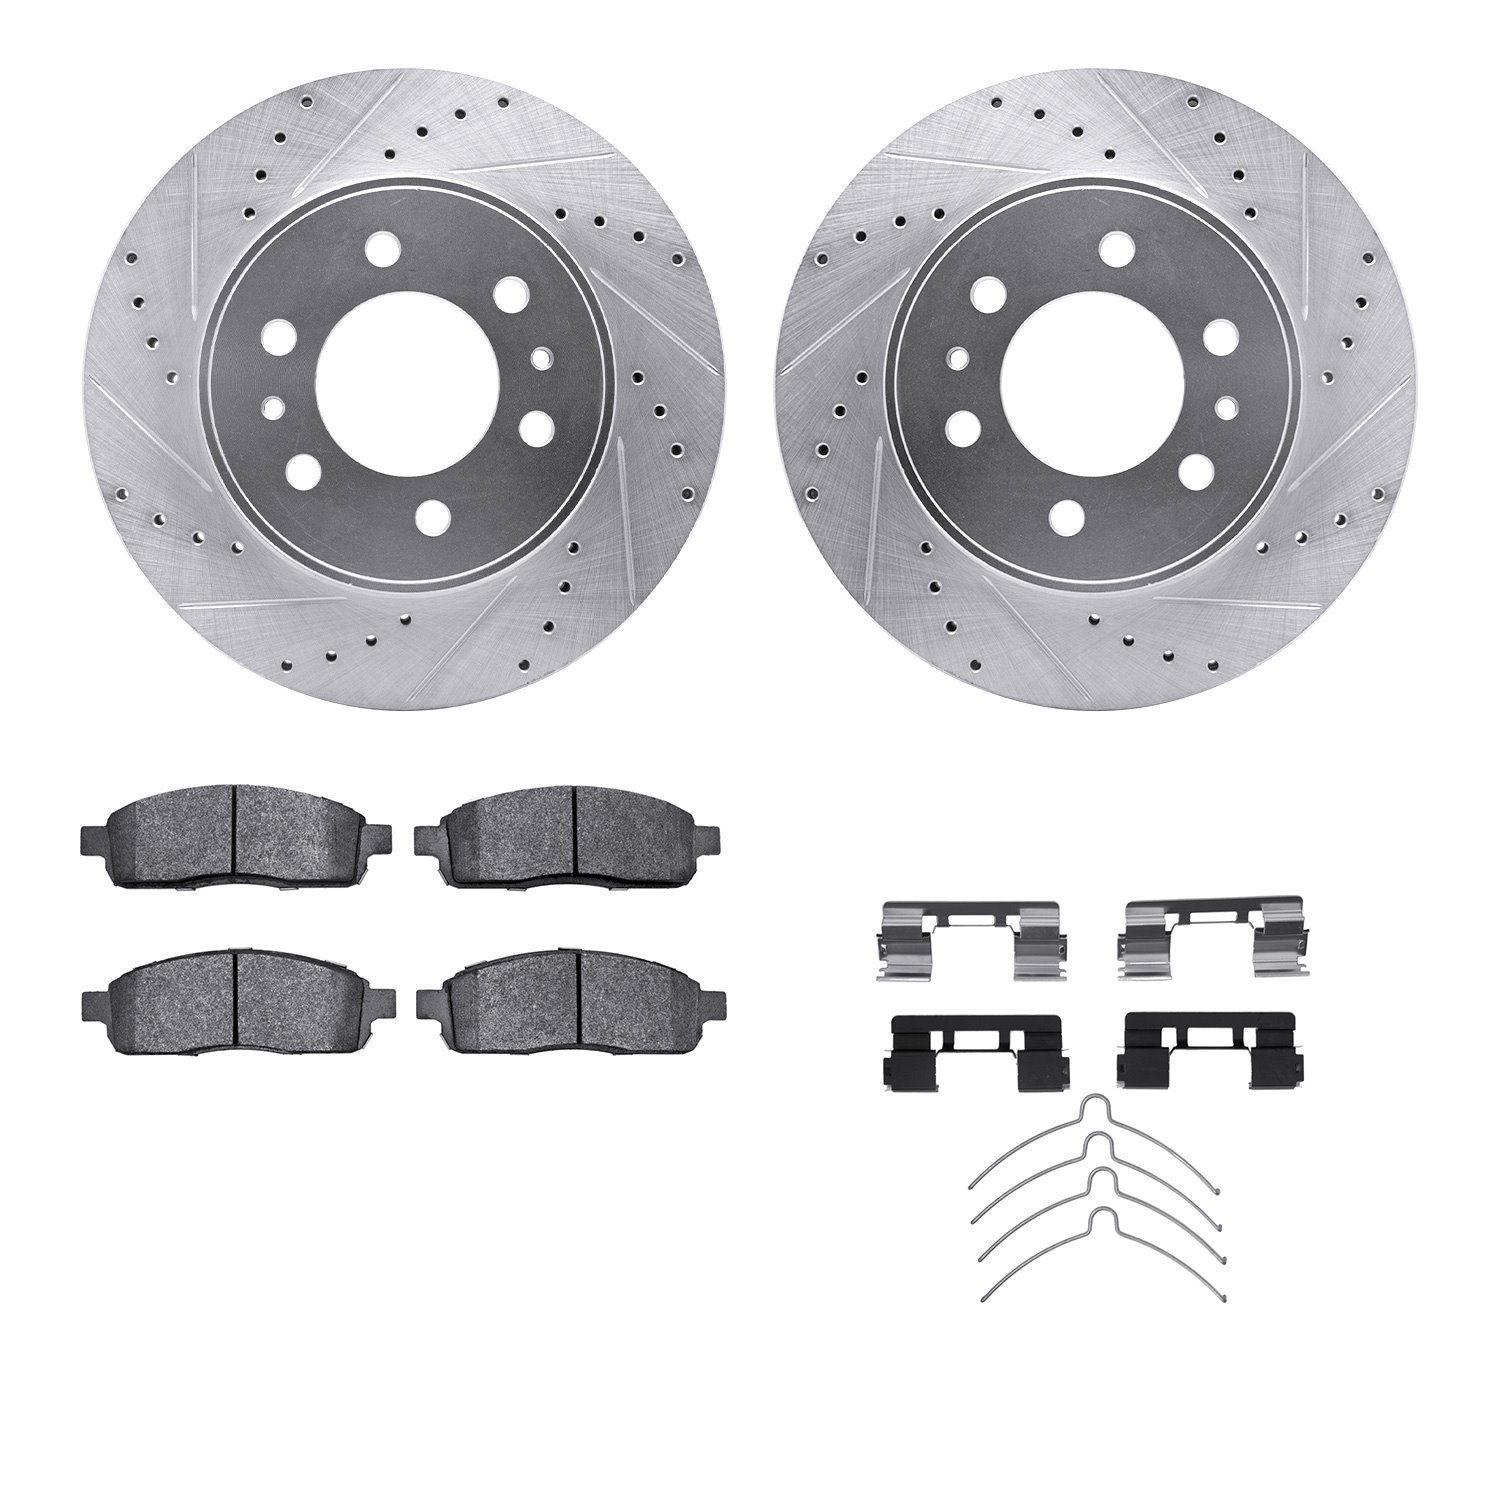 7212-99224 Drilled/Slotted Rotors w/Heavy-Duty Brake Pads Kit & Hardware [Silver], 2009-2009 Ford/Lincoln/Mercury/Mazda, Positio